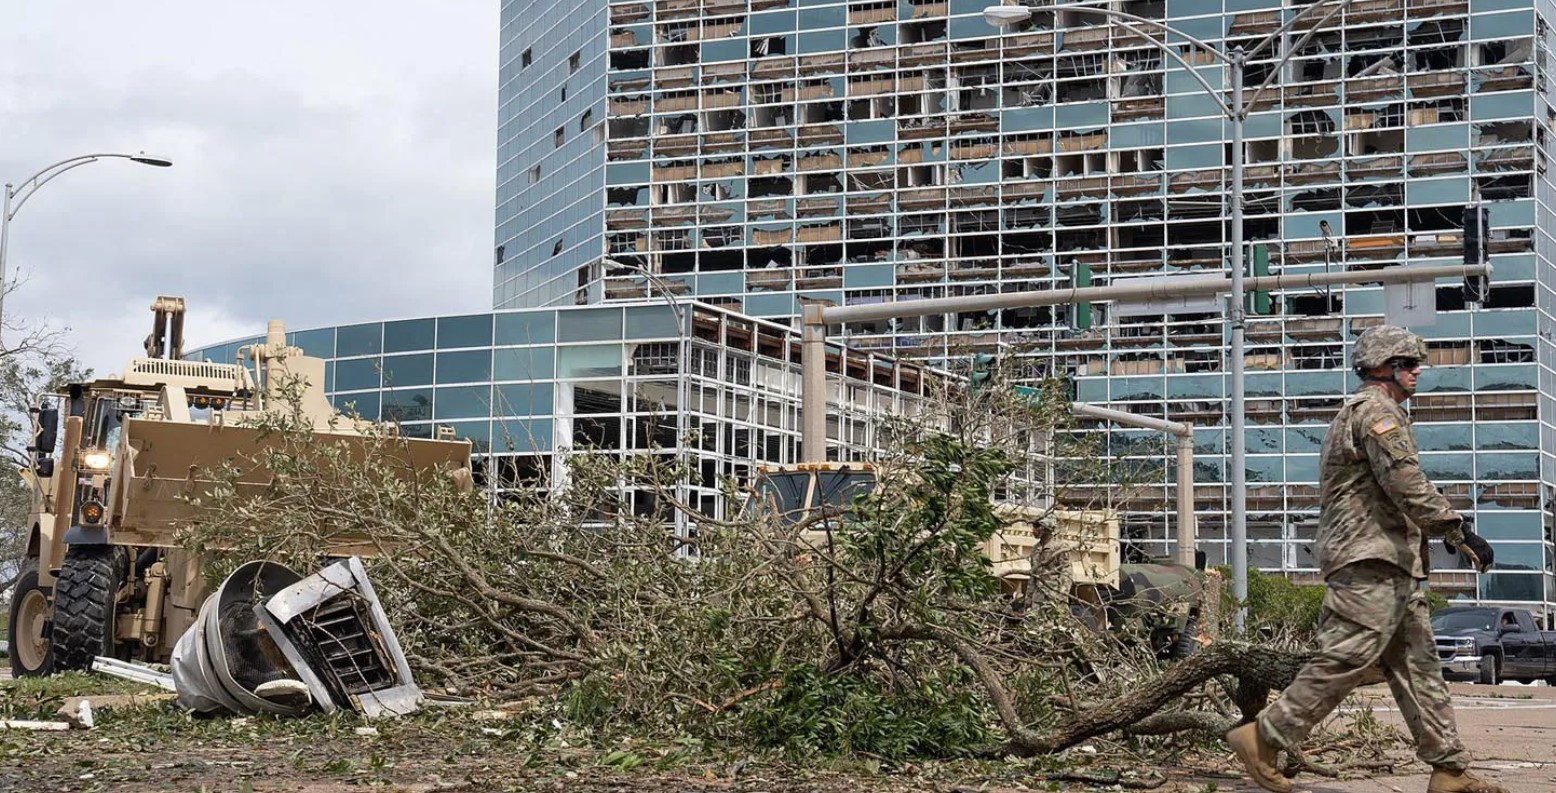 Resilient Buildings: Disaster is a Hazard You Didn’t Prepare For